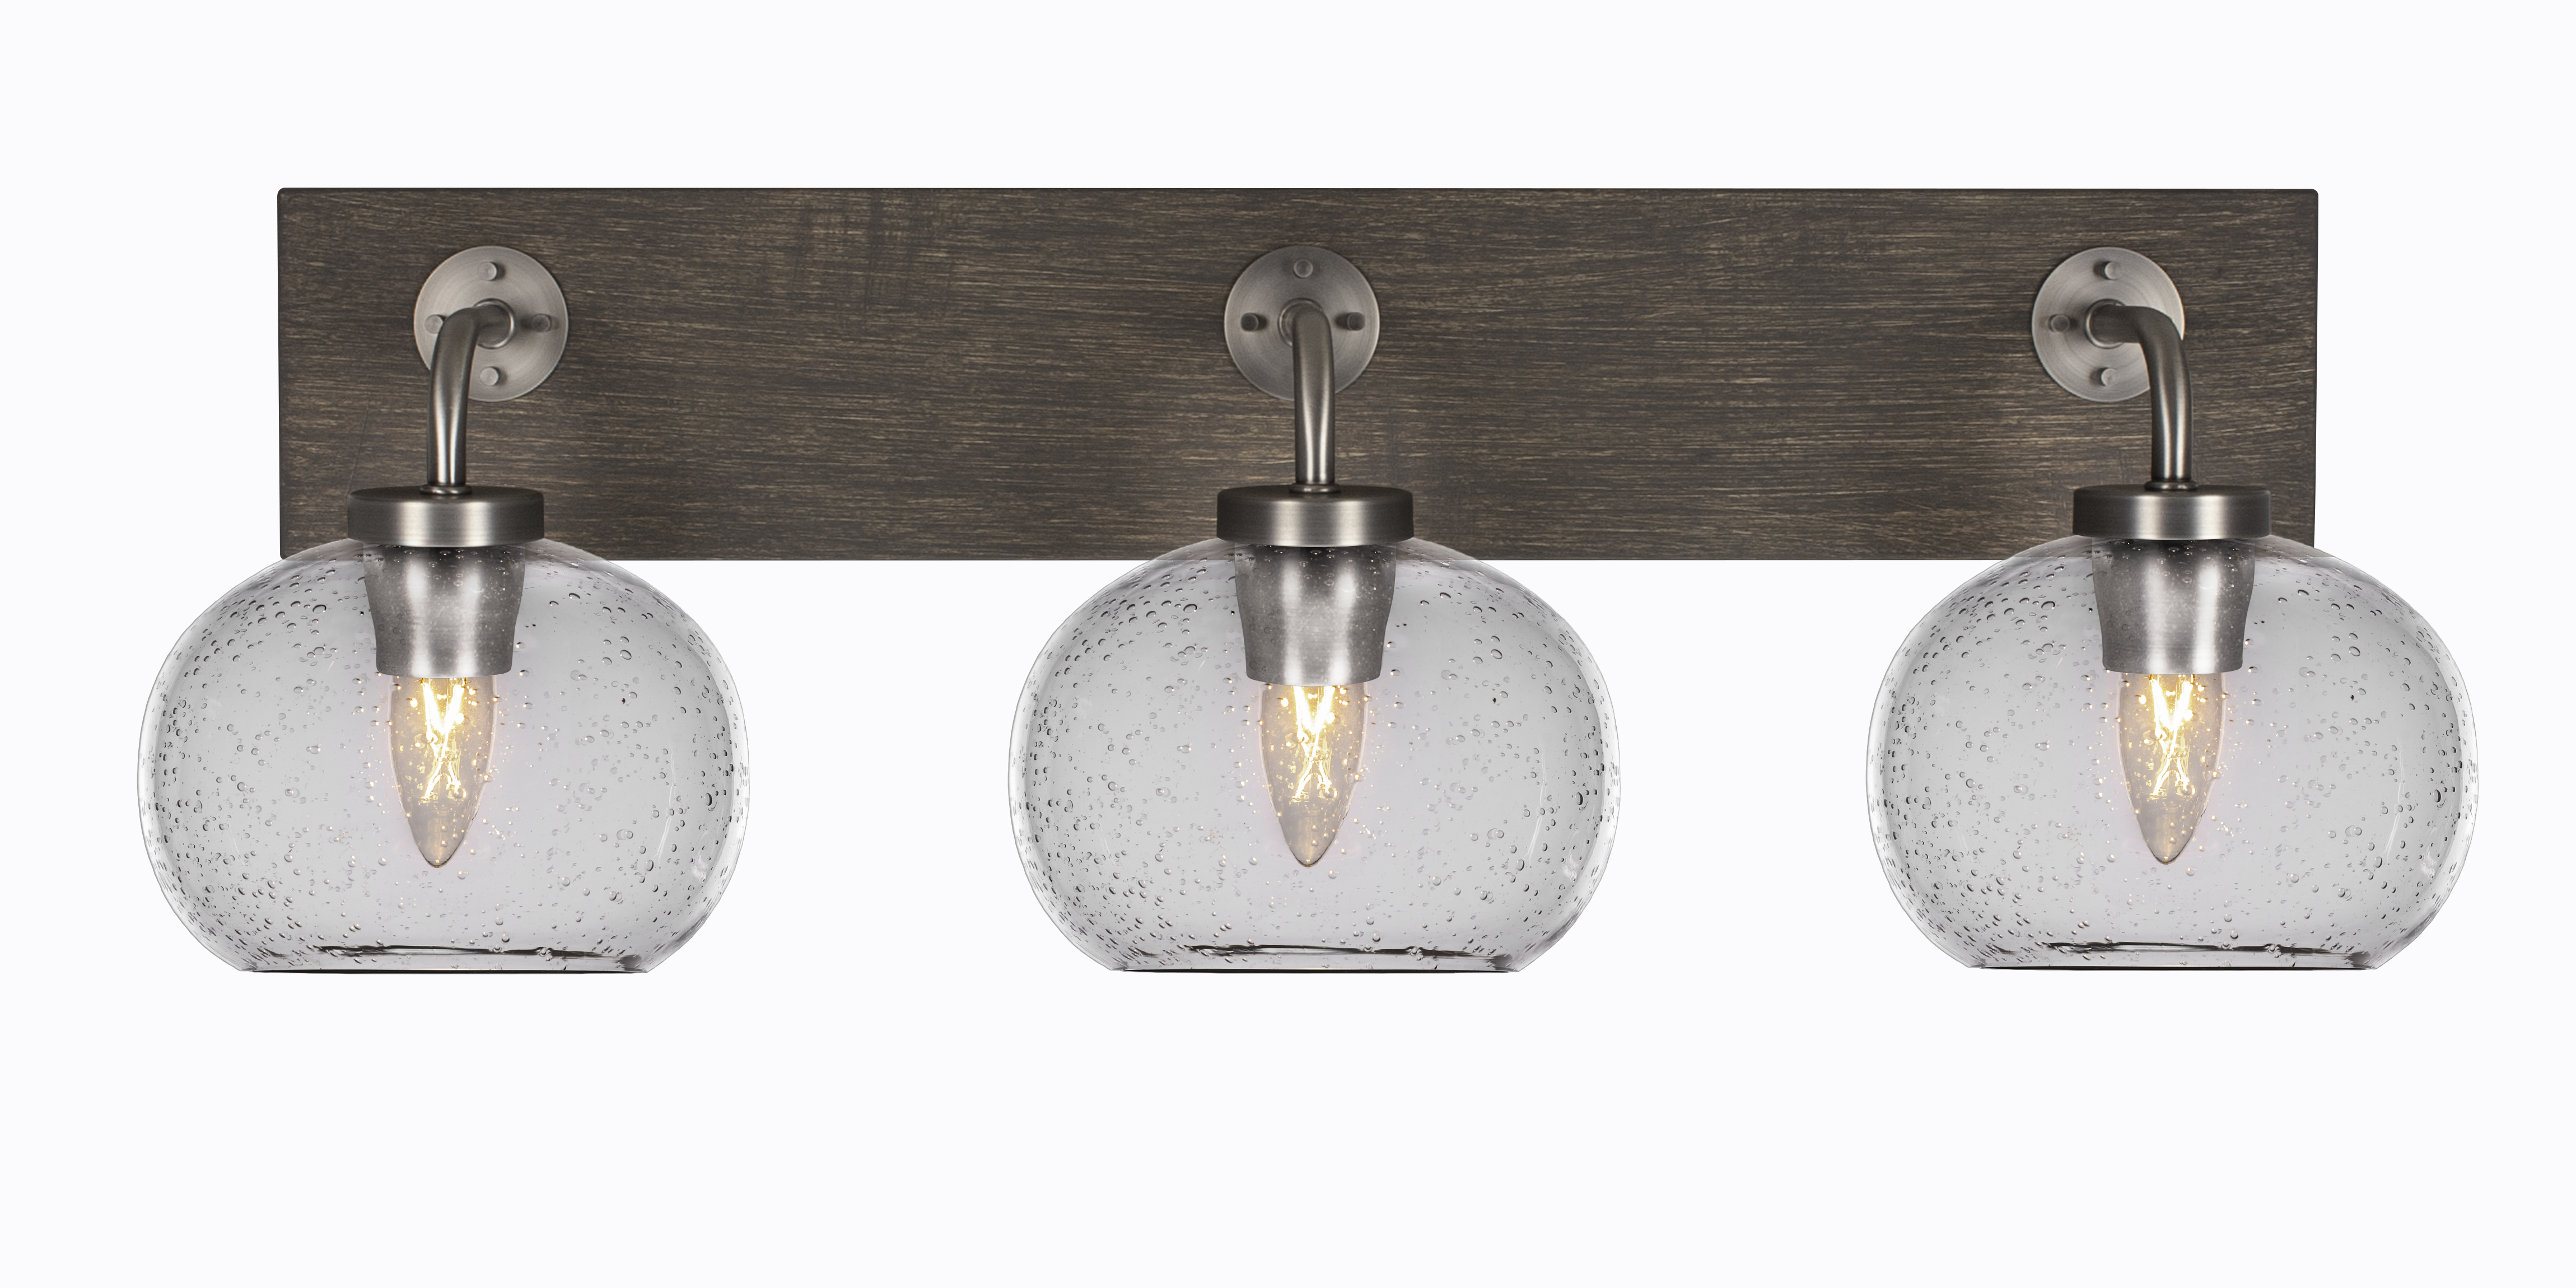 Toltec Lighting 1773-GPDW-202 Oxbridge 3 Light Bath Bar In Graphite & Painted Distressed Wood-look Metal Finish With 7" Clear Bubble Glass